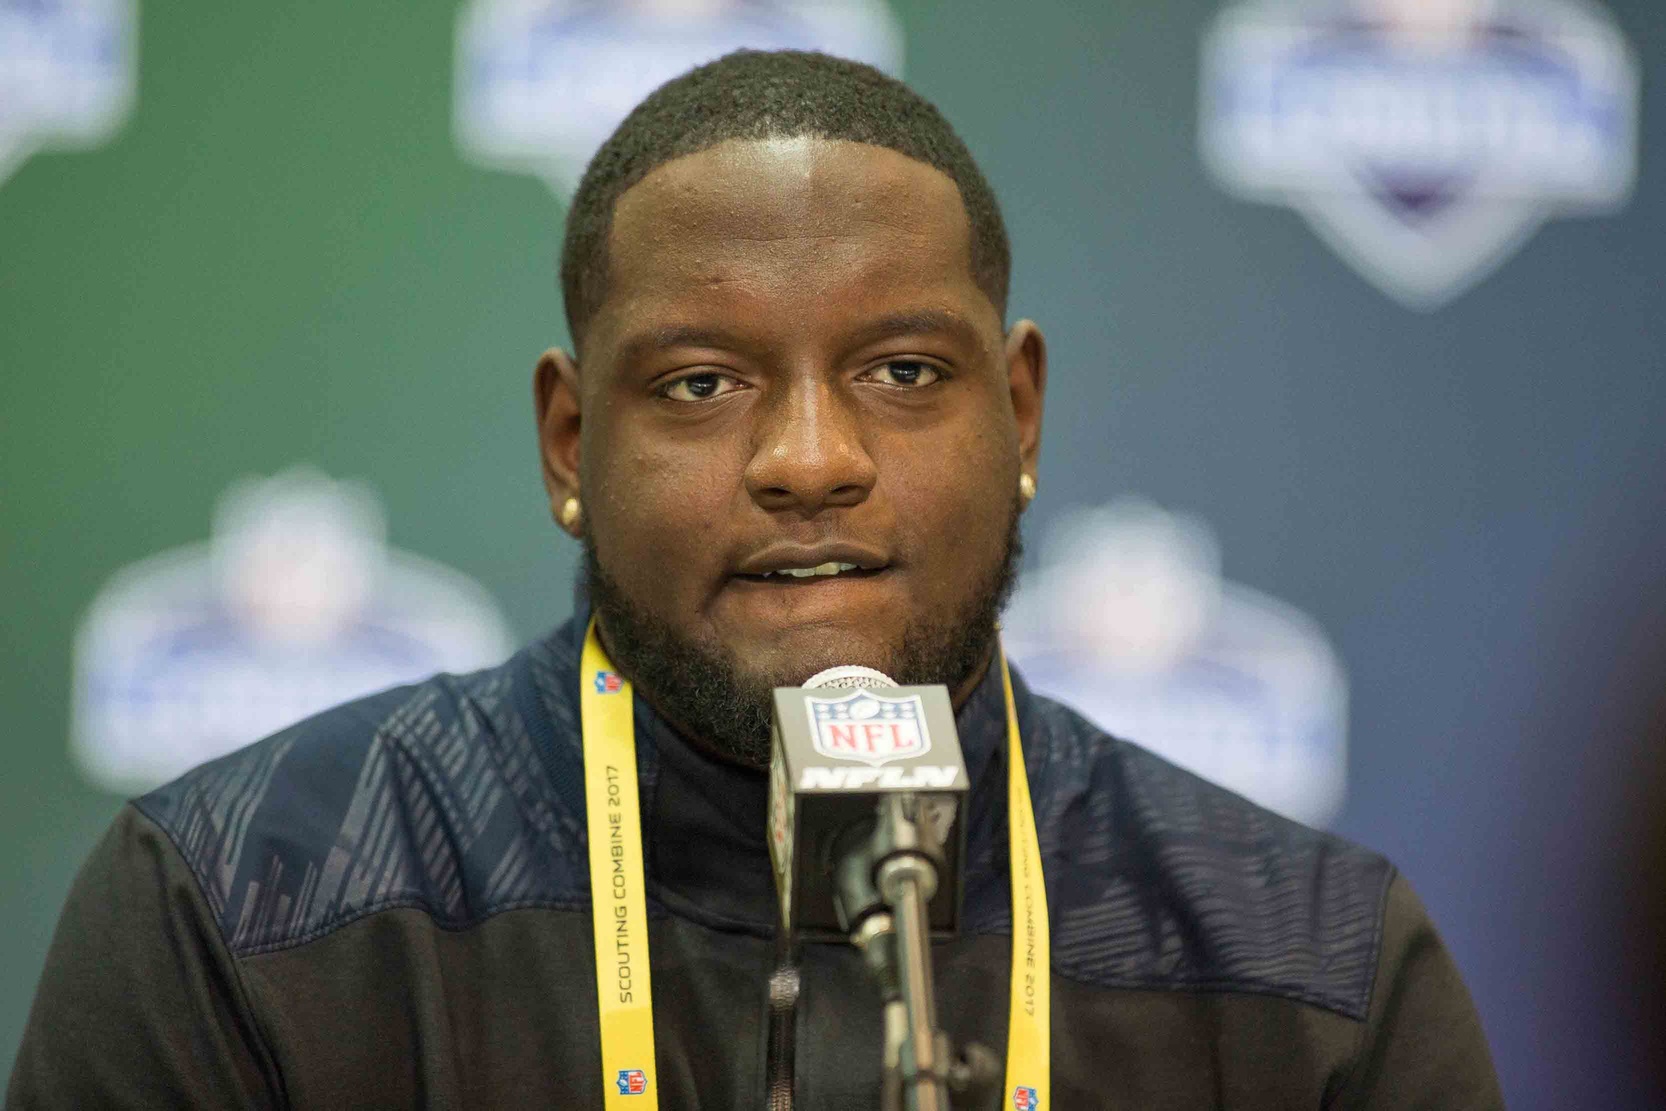 Mar 2, 2017; Indianapolis, IN, USA; Alabama offensive lineman Cam Robinson speaks to the media during the 2017 combine at Indiana Convention Center. Mandatory Credit: Trevor Ruszkowski-USA TODAY Sports